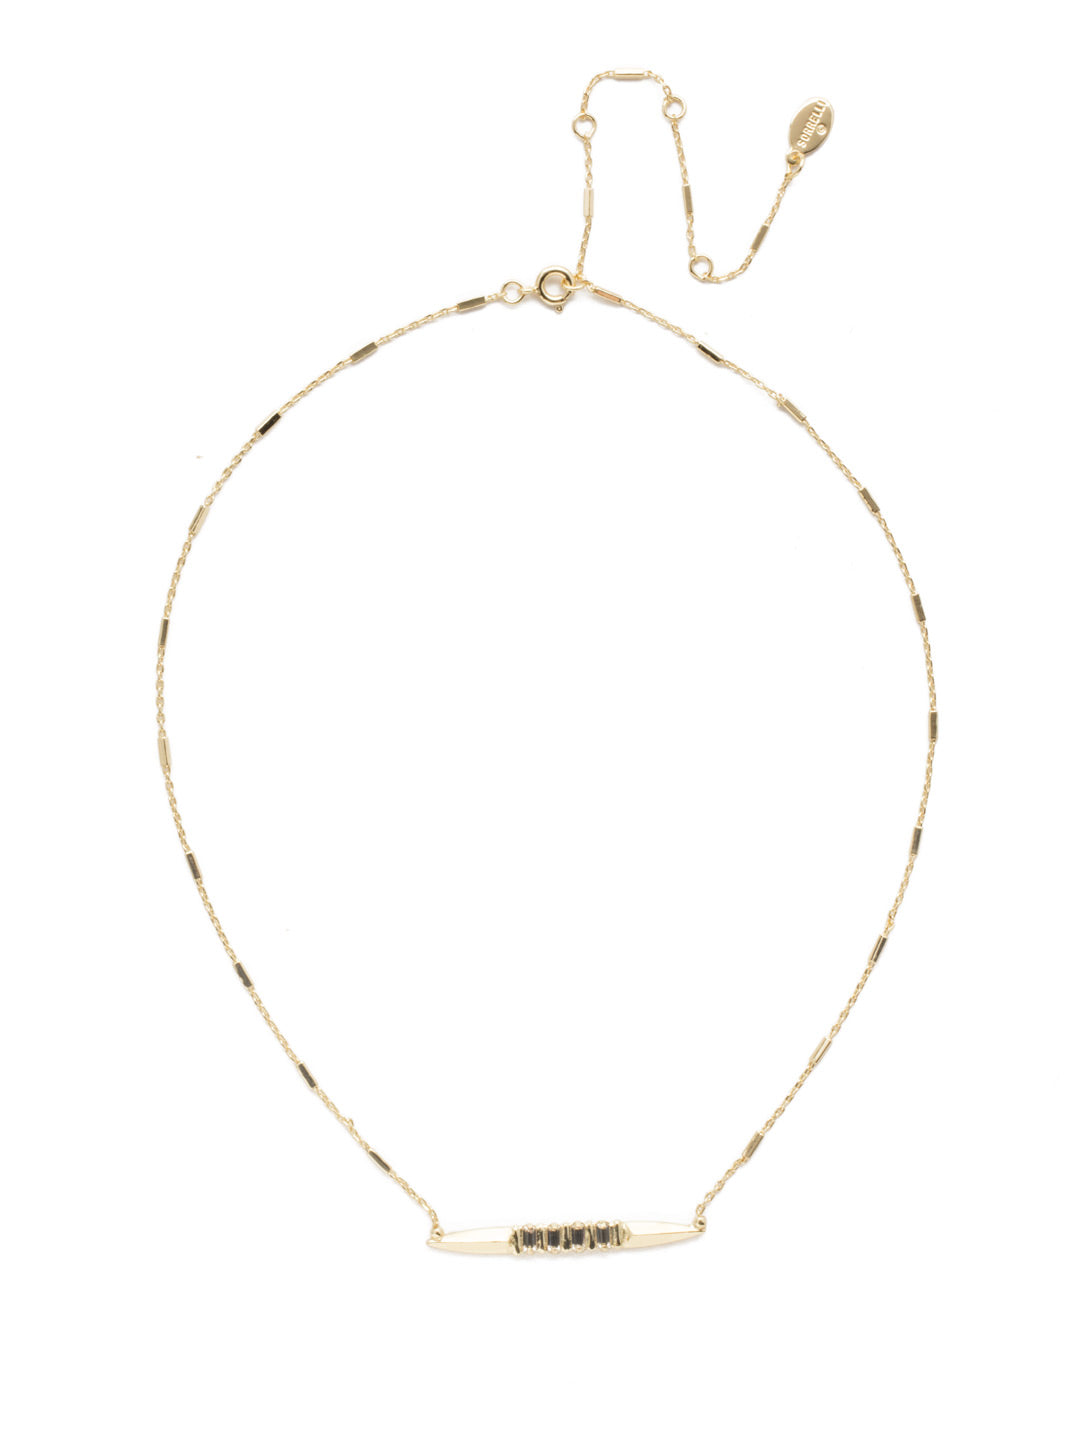 Halcyon Cursory Pendant Necklace - 4NEK28BGCRY - <p>Baguette crystals take center stage in this pendant necklace that's otherwise an interesting metallic beauty. From Sorrelli's Crystal collection in our Bright Gold-tone finish.</p>